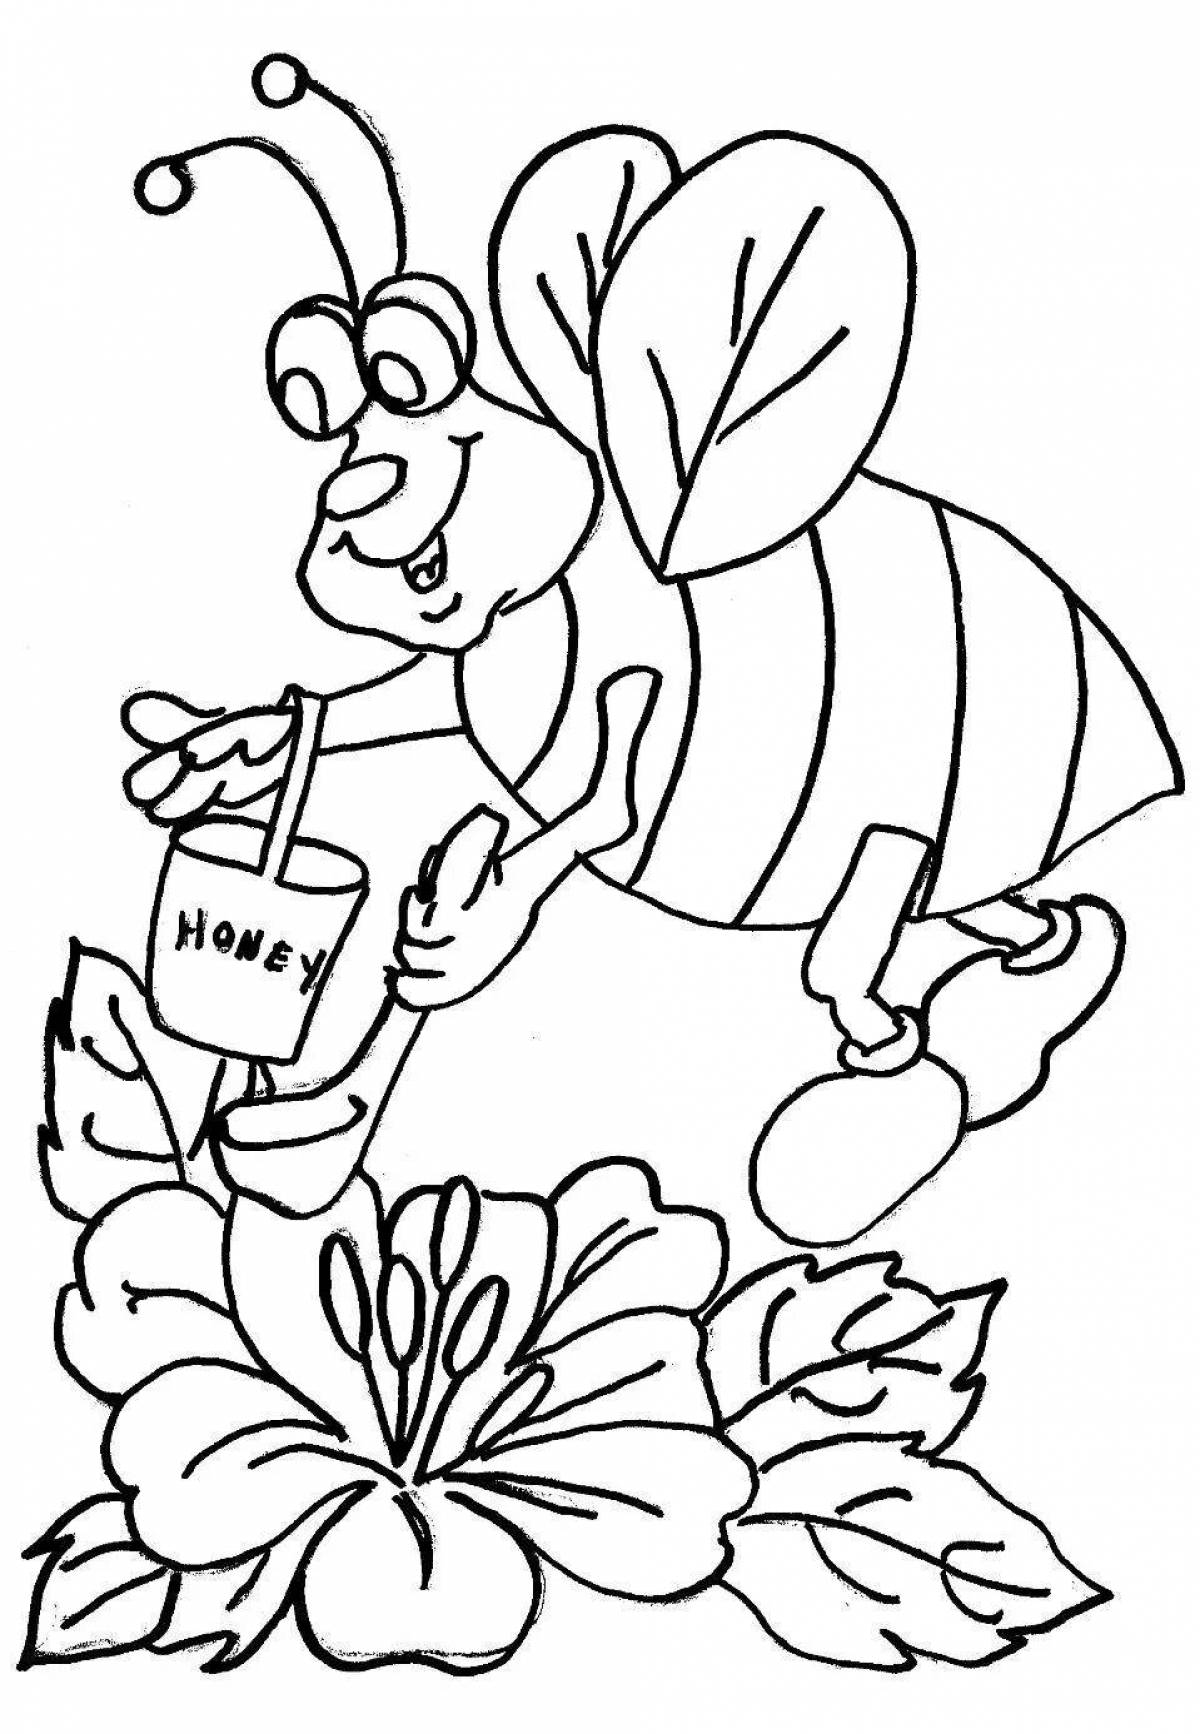 Coloring book nice bee for children 6-7 years old